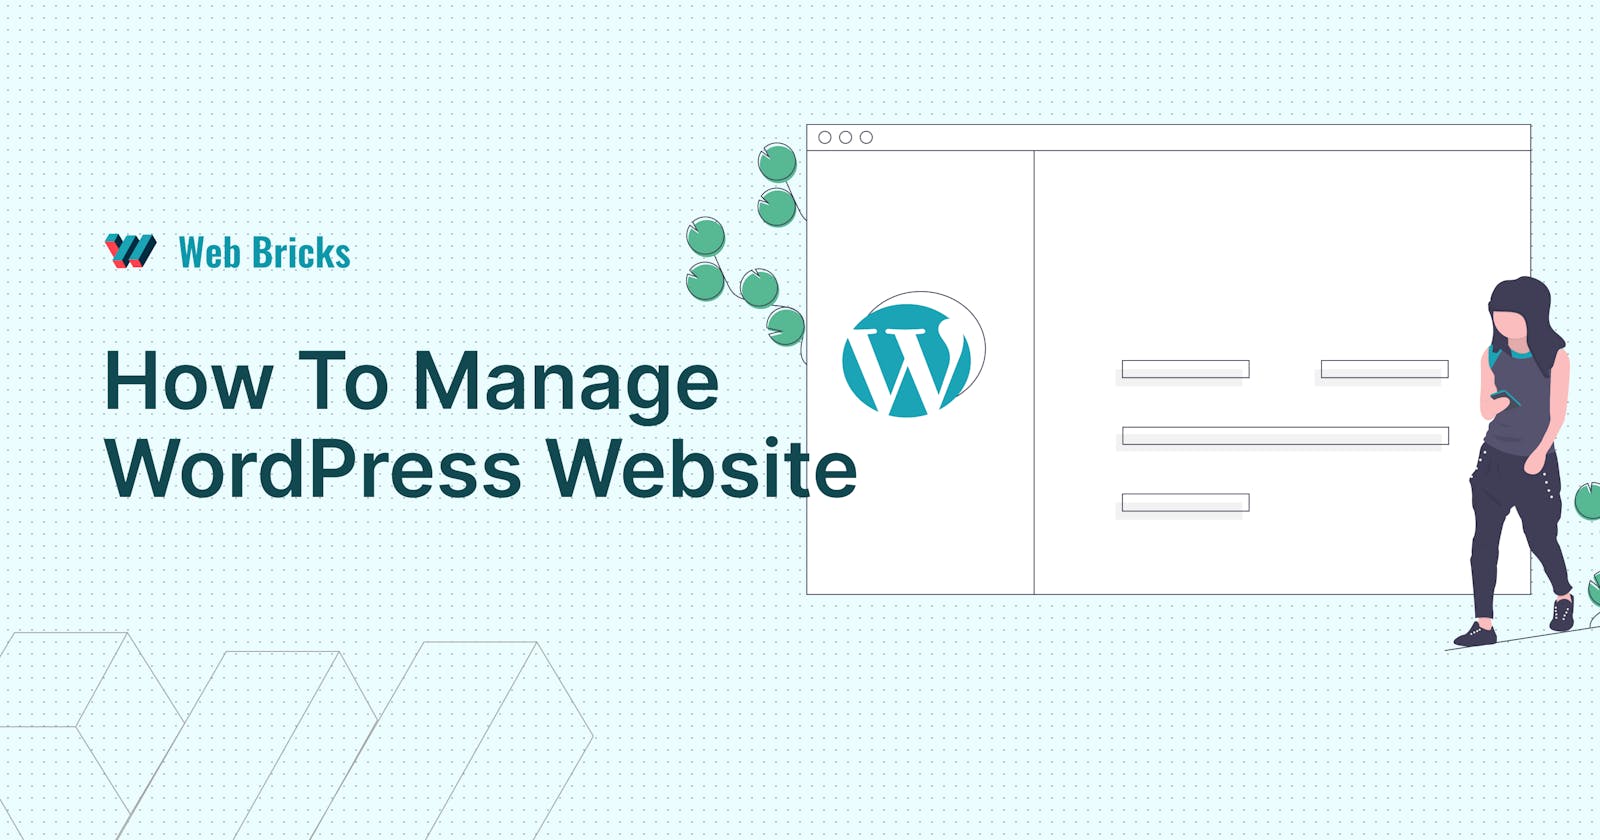 How To Manage WordPress Website For Business?